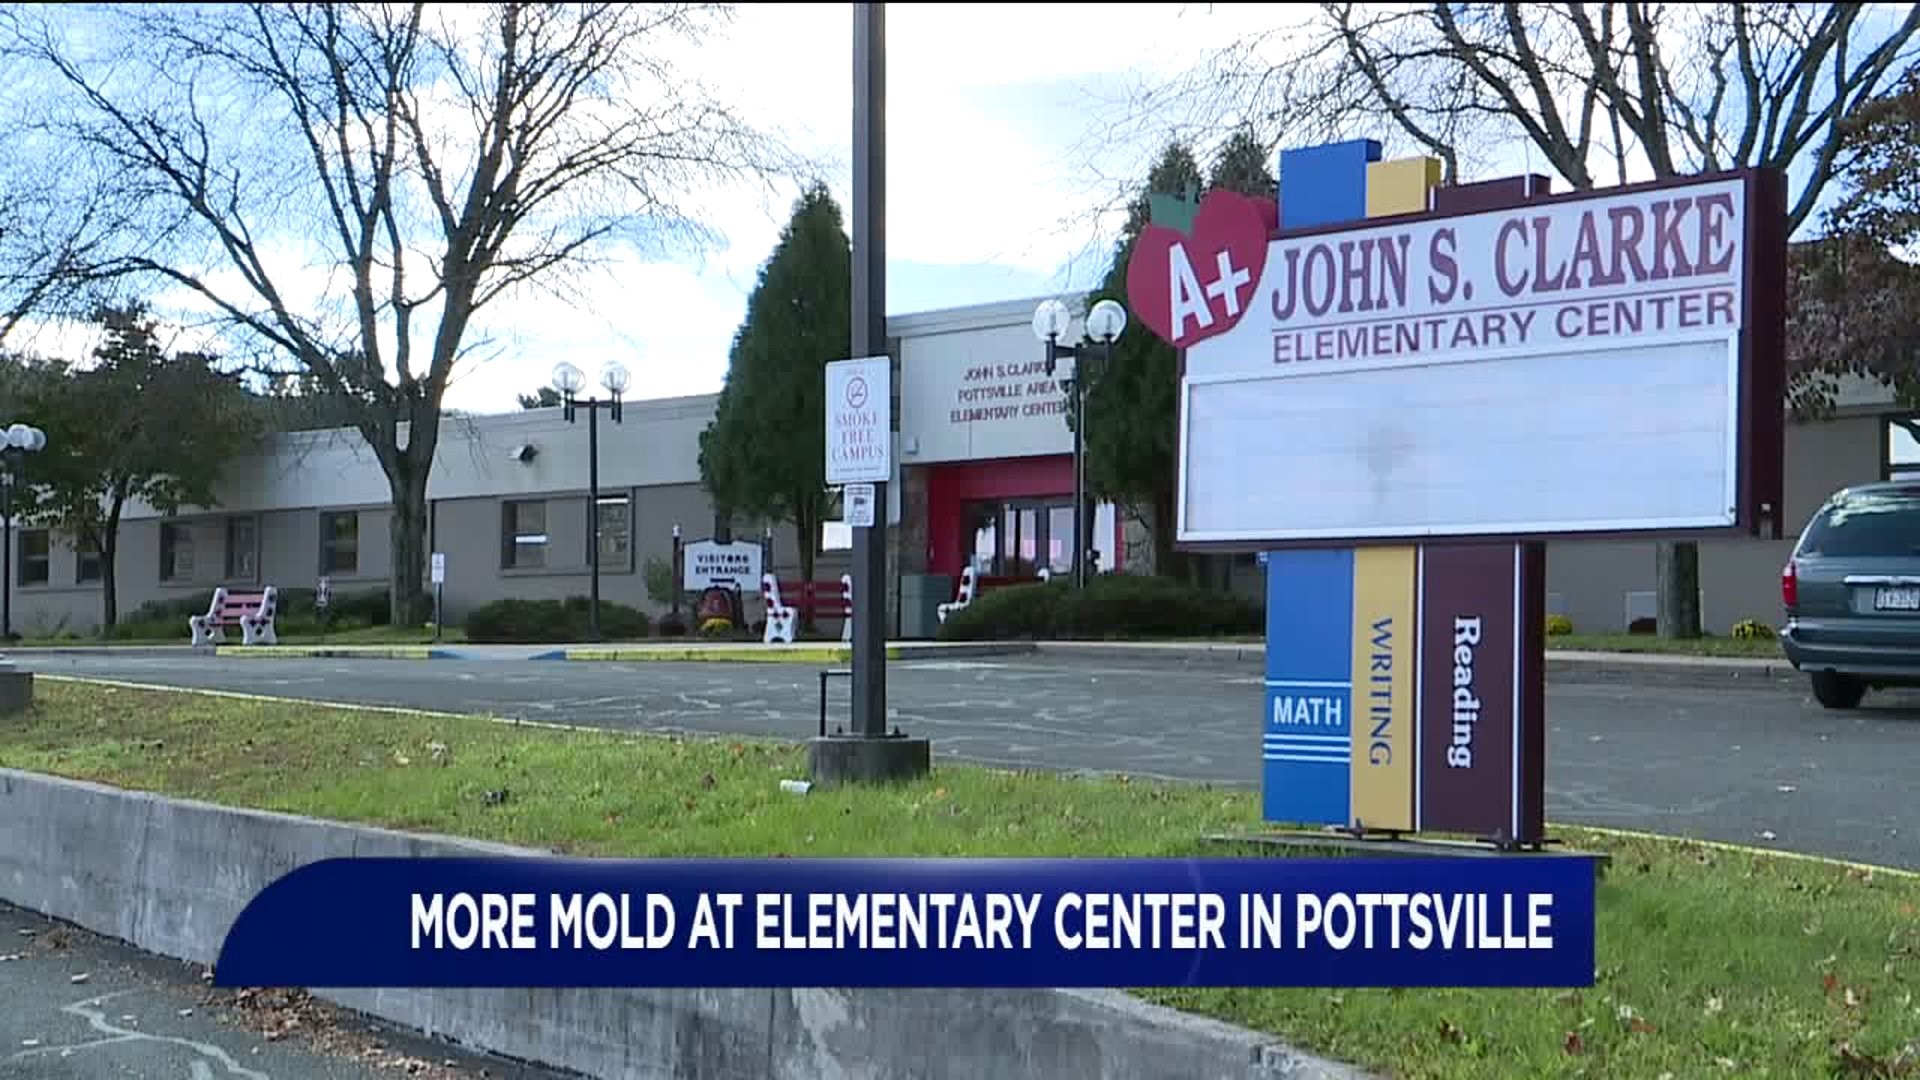 More Mold at Elementary Center in Pottsville